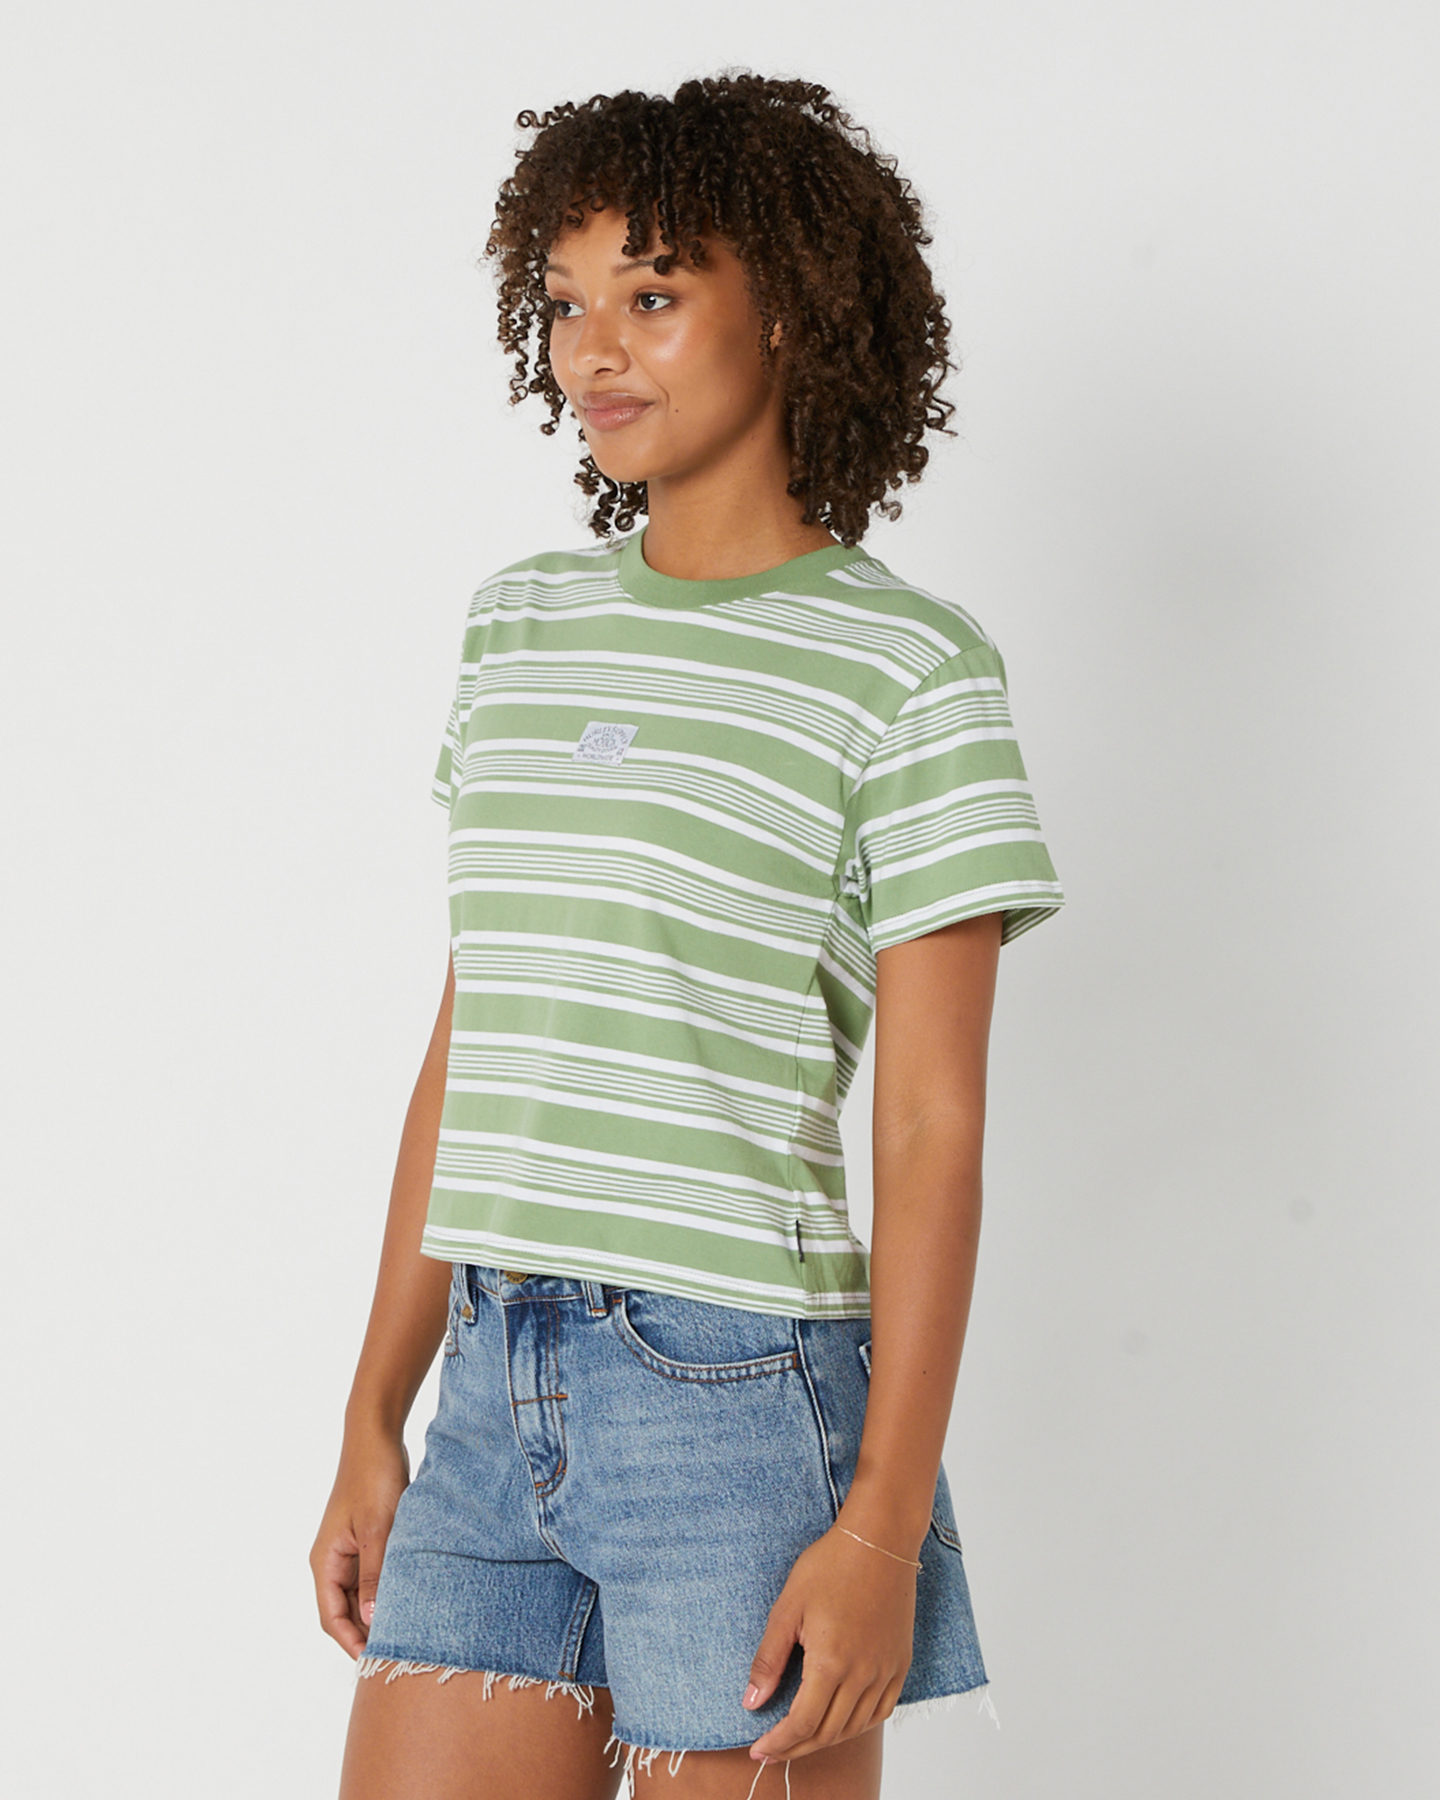 Hurley Signature Stripe Tee - Loden Frost | SurfStitch